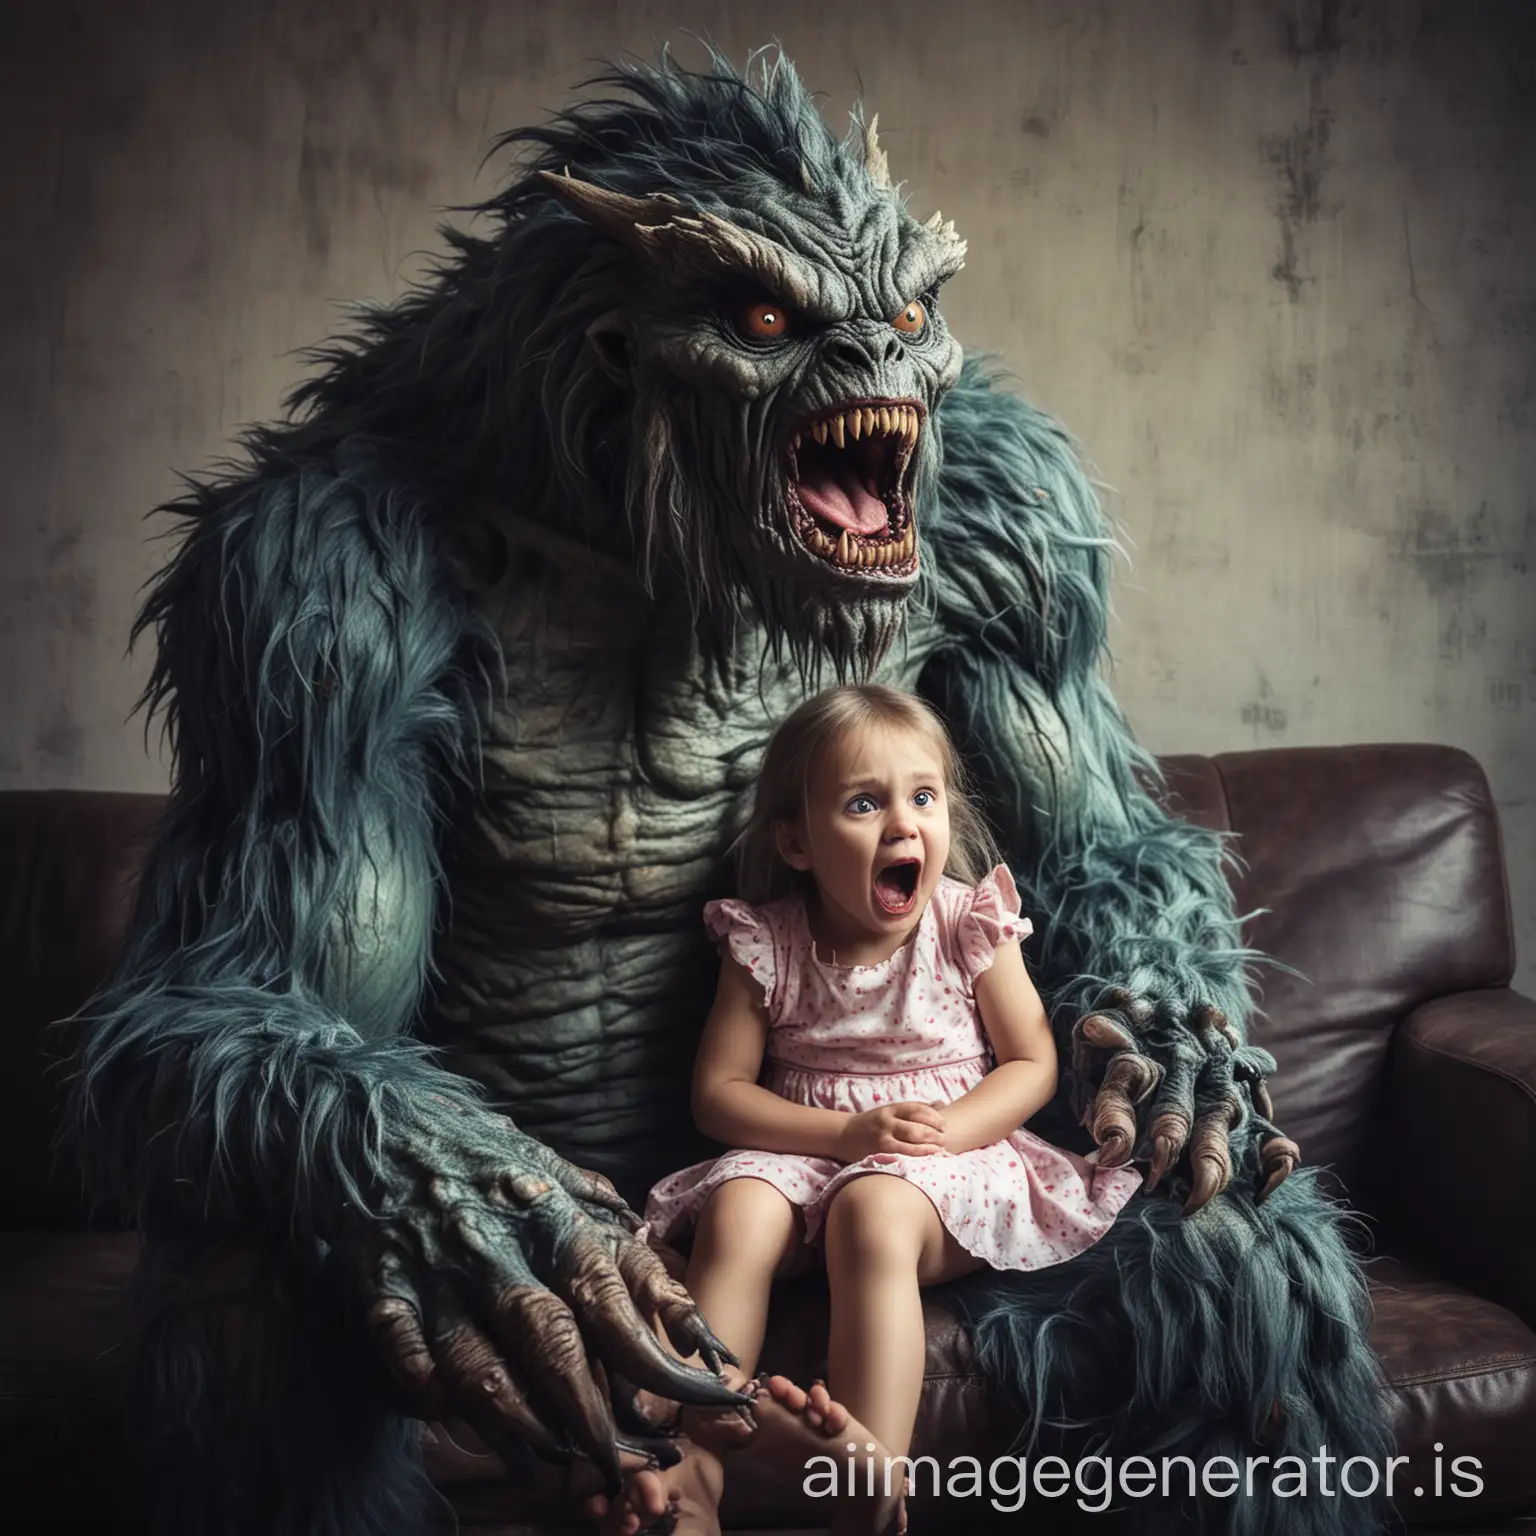 Giant-Monster-Frightfully-Biting-Little-Girl-while-She-Sits-Helplessly-on-His-Lap